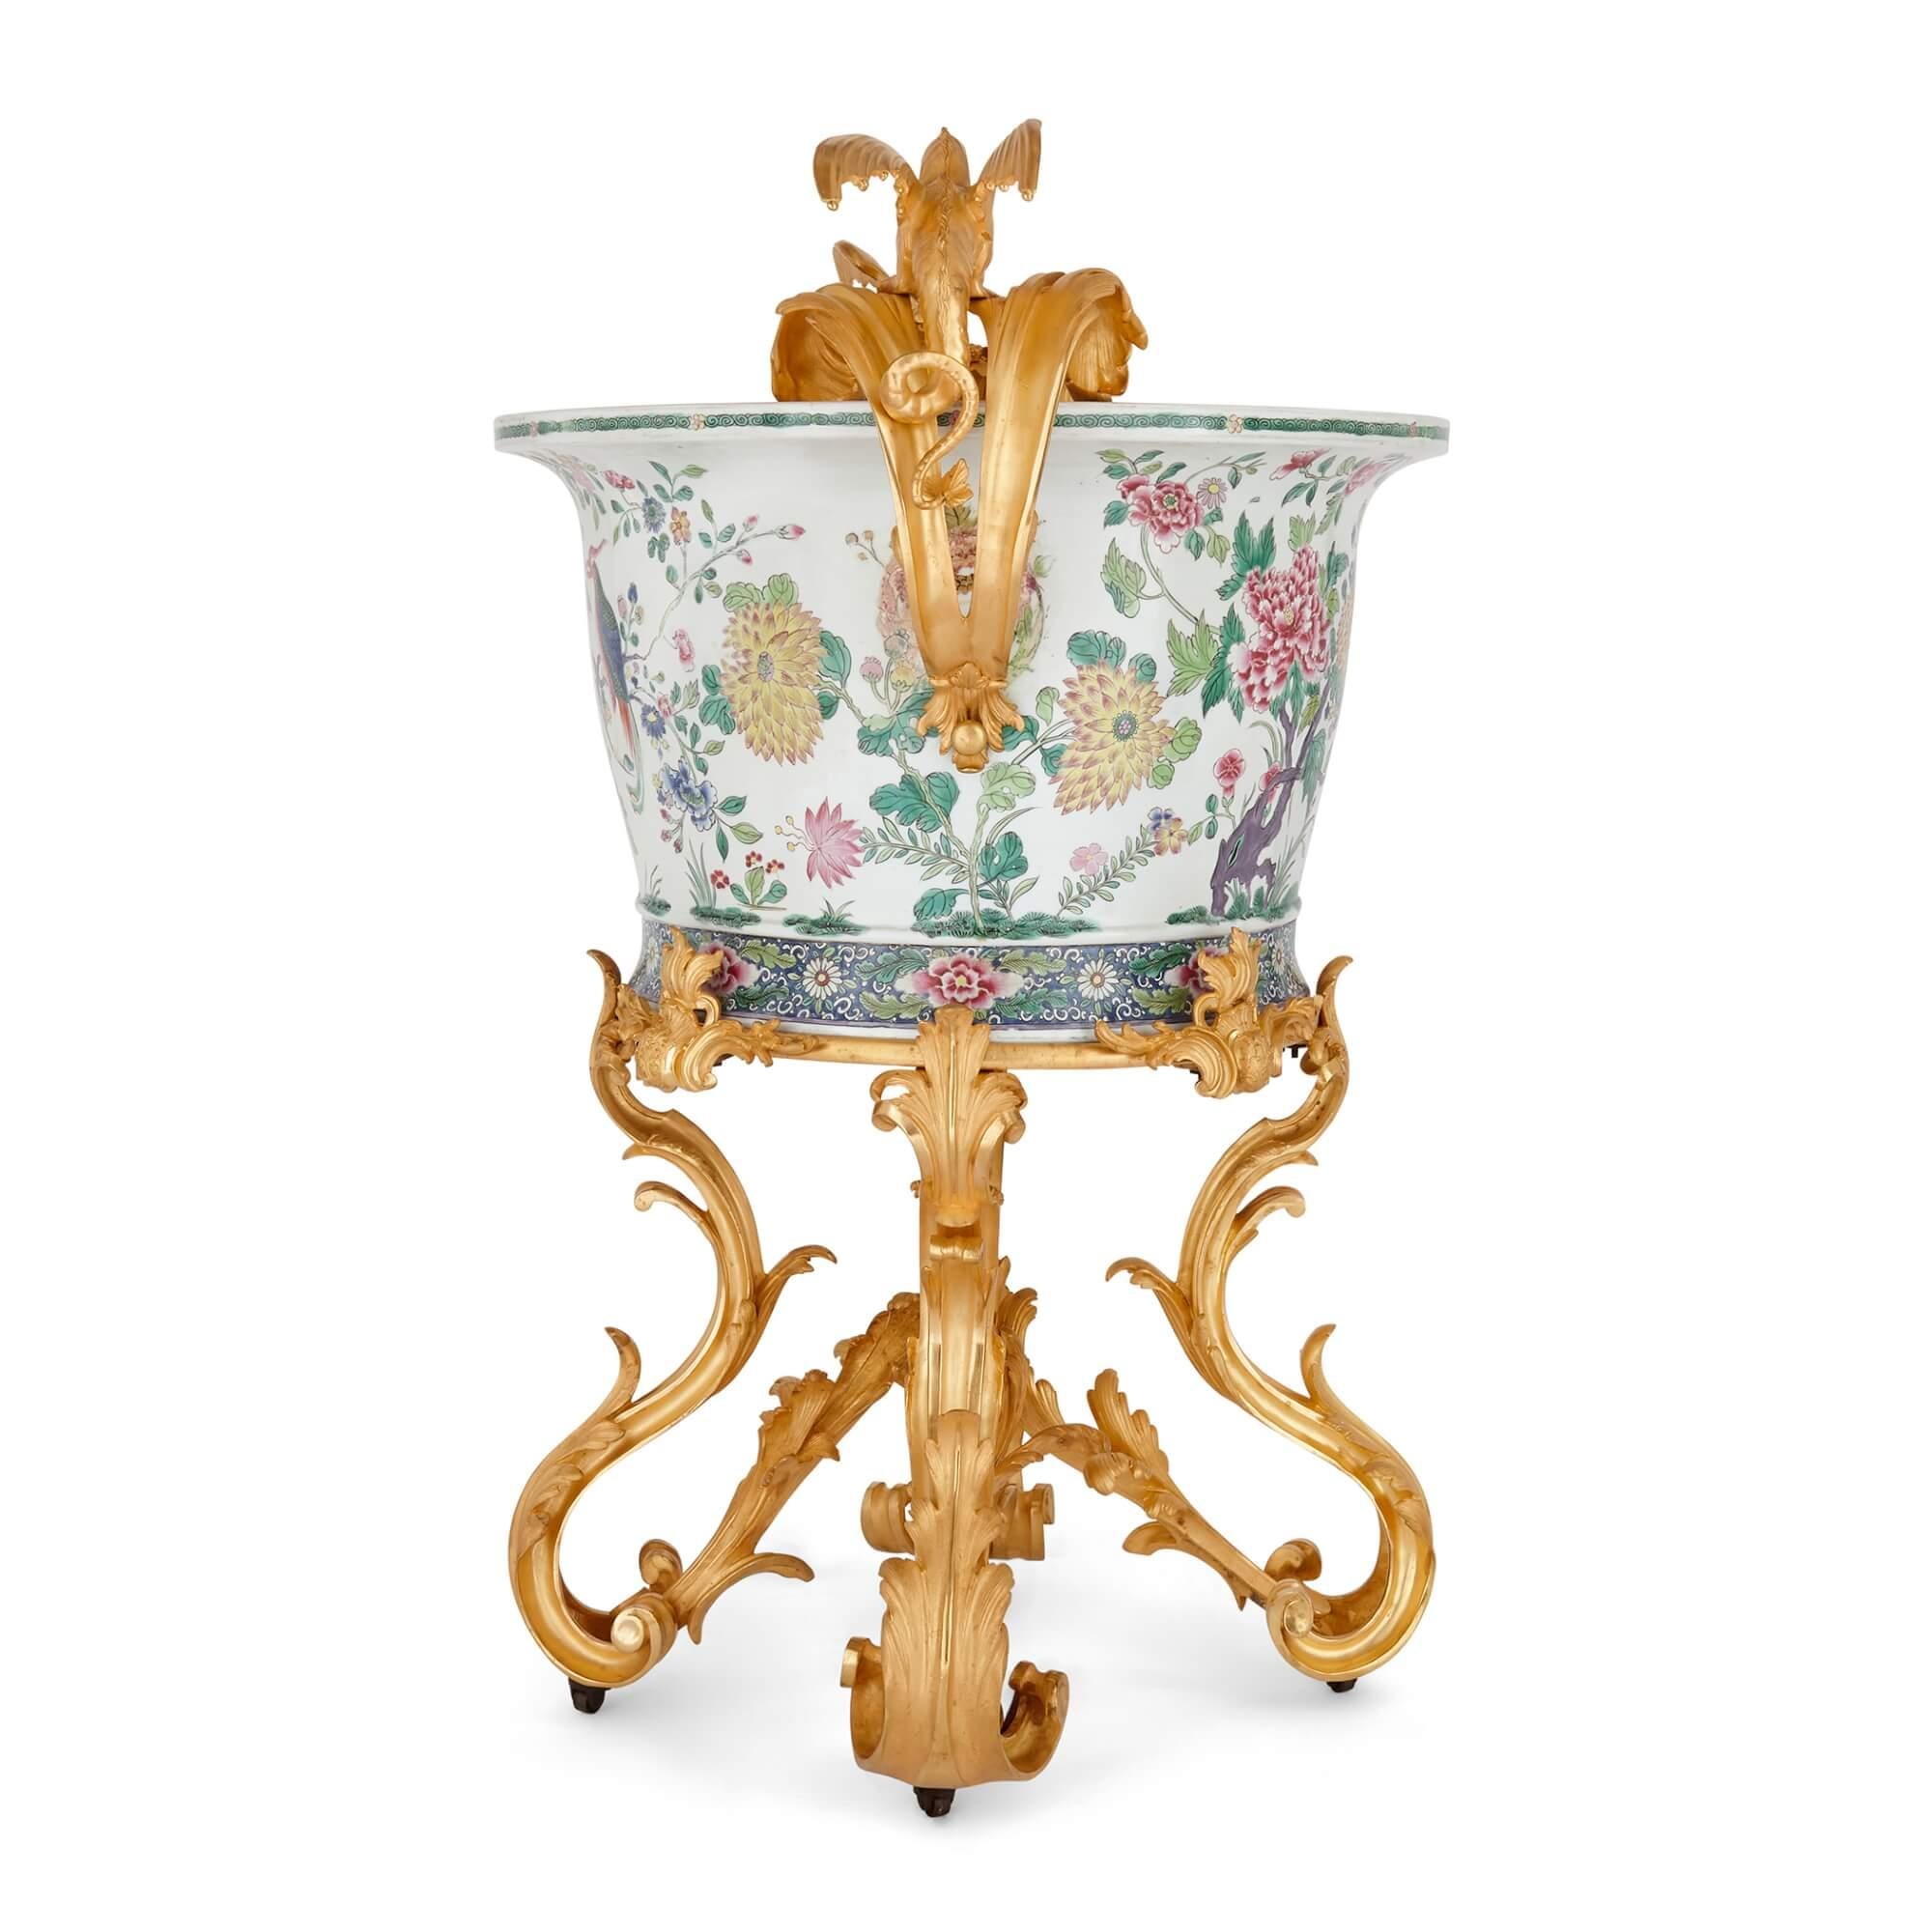 A large ormolu mounted Chinese porcelain jardinière
French and Chinese, Late 19th Century
Height 102cm, width 80cm, depth 63cm

Combining Chinese porcelain with French metalwork in the form of gilt-bronze mounts, this excellent decorative piece